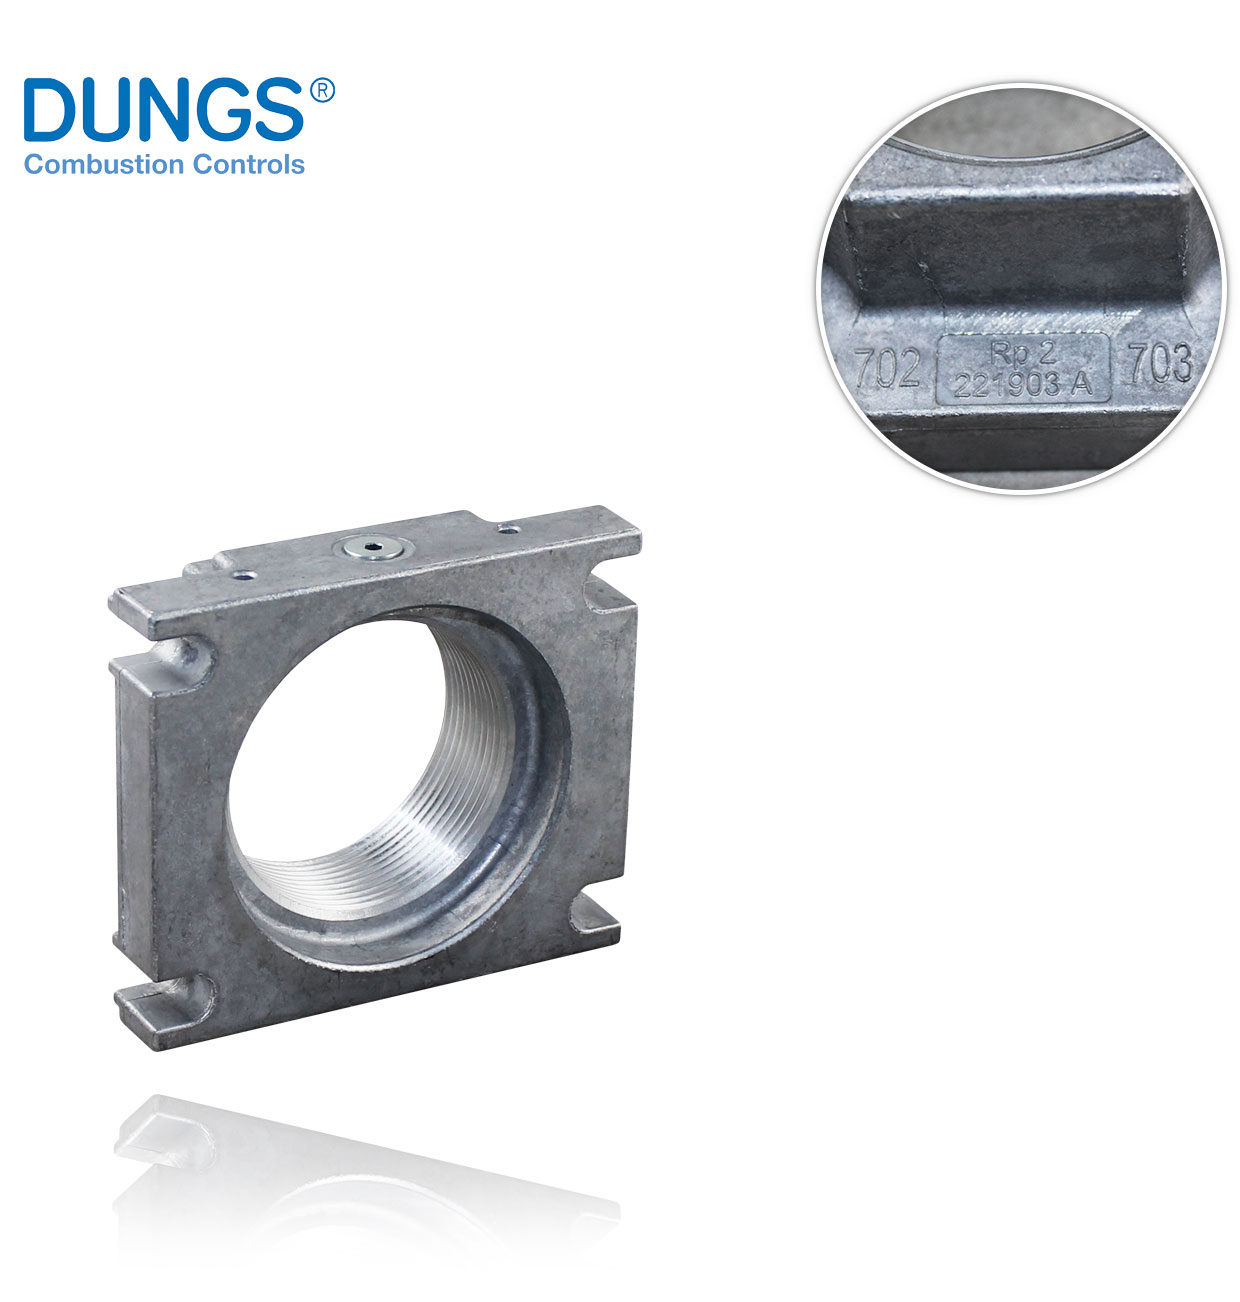 FLANGE WITH PLUG R2" FOR DMV 512/11+520/11 DUNGS